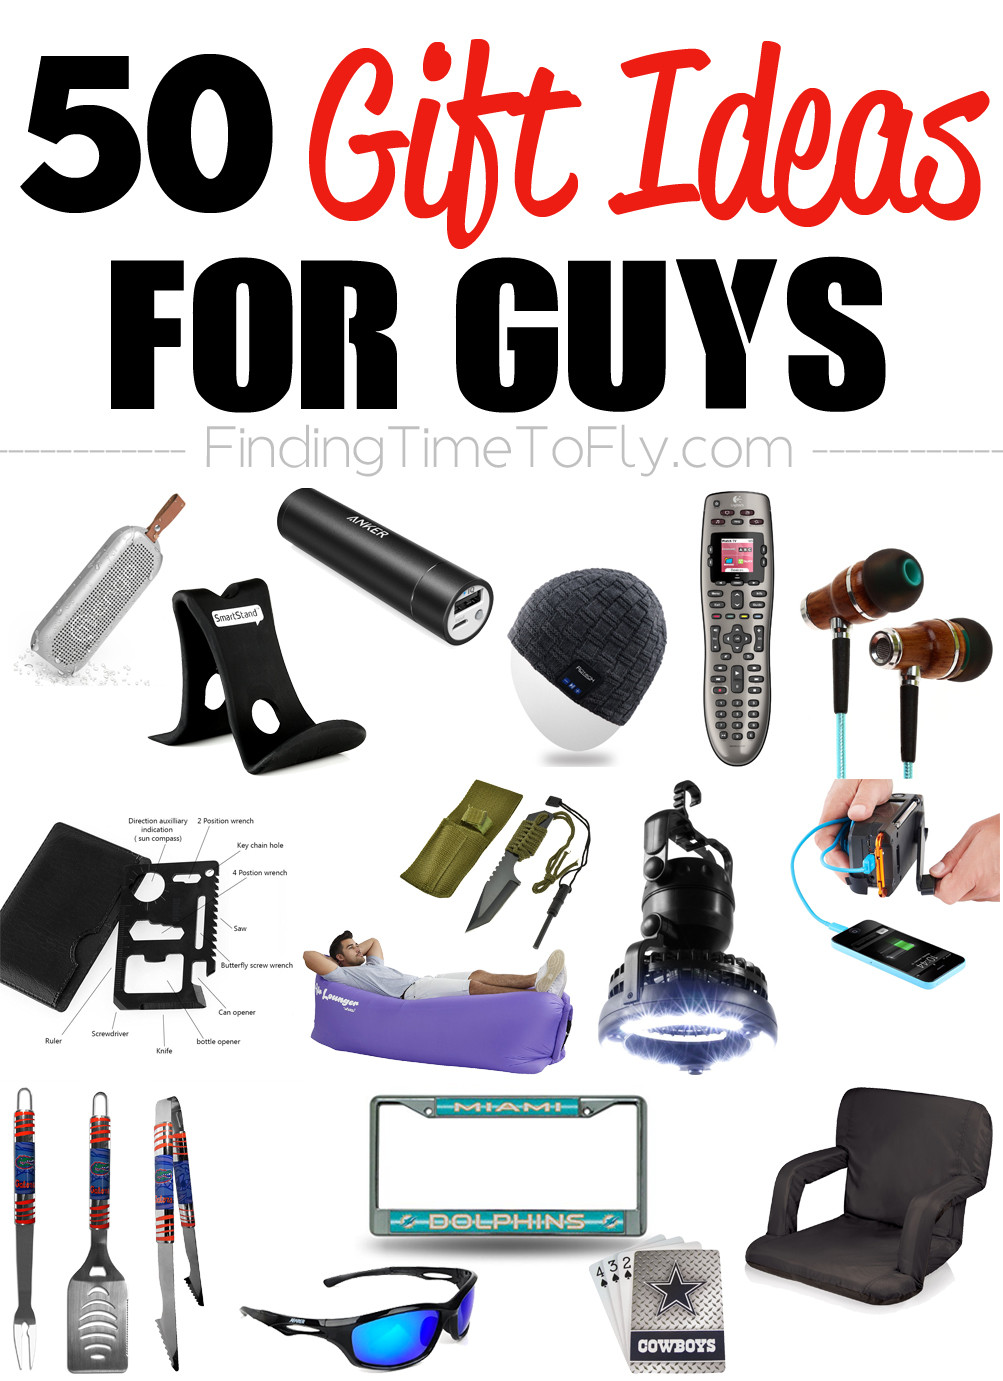 Graduation Gift Ideas For Guys
 50 Gifts for Guys for Every Occasion Finding Time To Fly